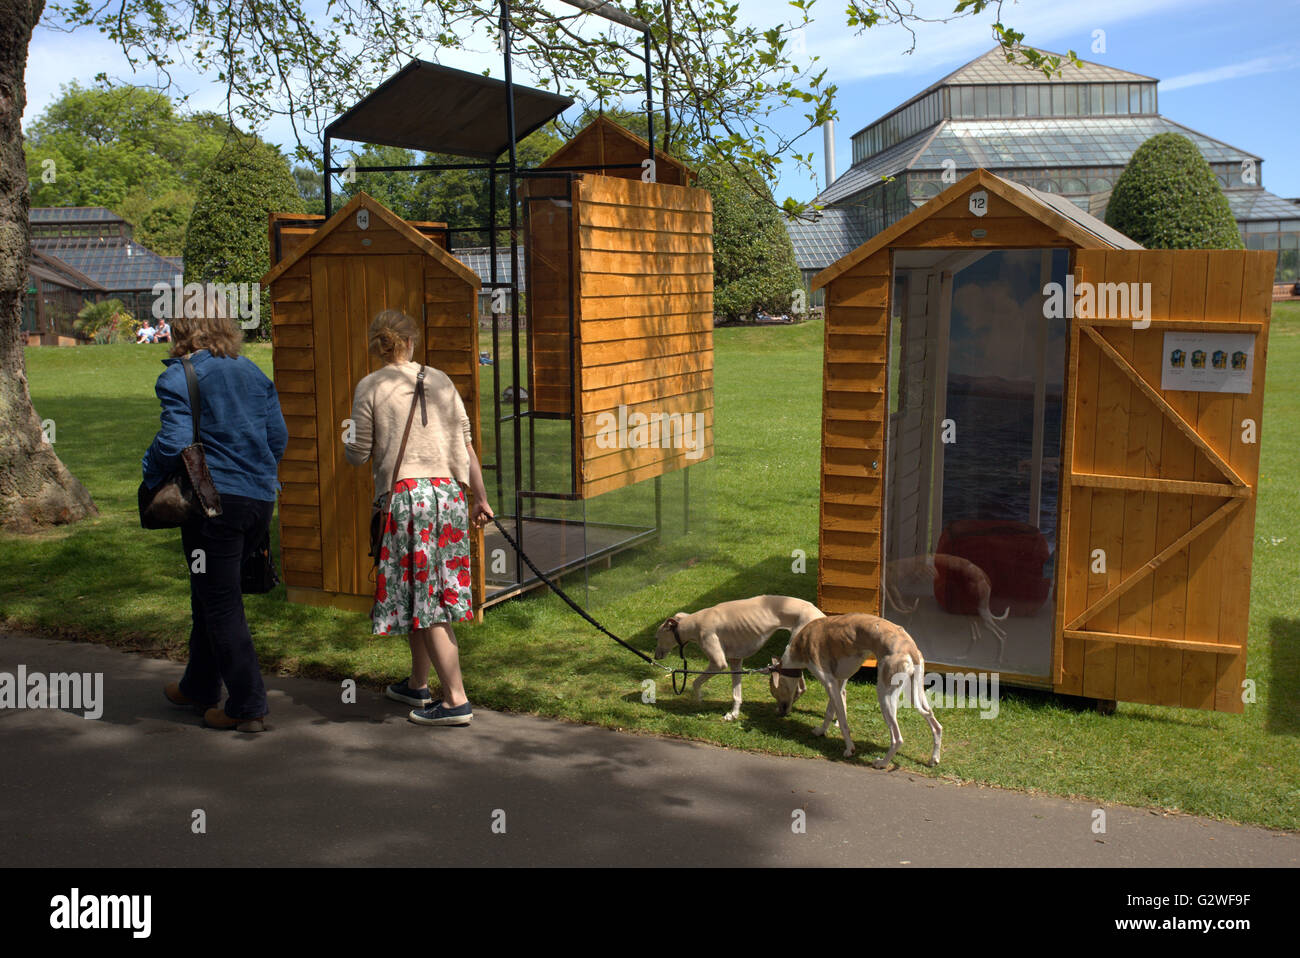 Glasgow, Scotland, UK 3rd June 2016. Men and Sheds, 'The Ideal Hut Show' a series of designer sheds opened in Glasgow's Botanic Gardens today. An esoteric collection includes 18 garden sheds, transformed by top architects and designers from across the UK. Credit:  Gerard Ferry/Alamy Live News Stock Photo